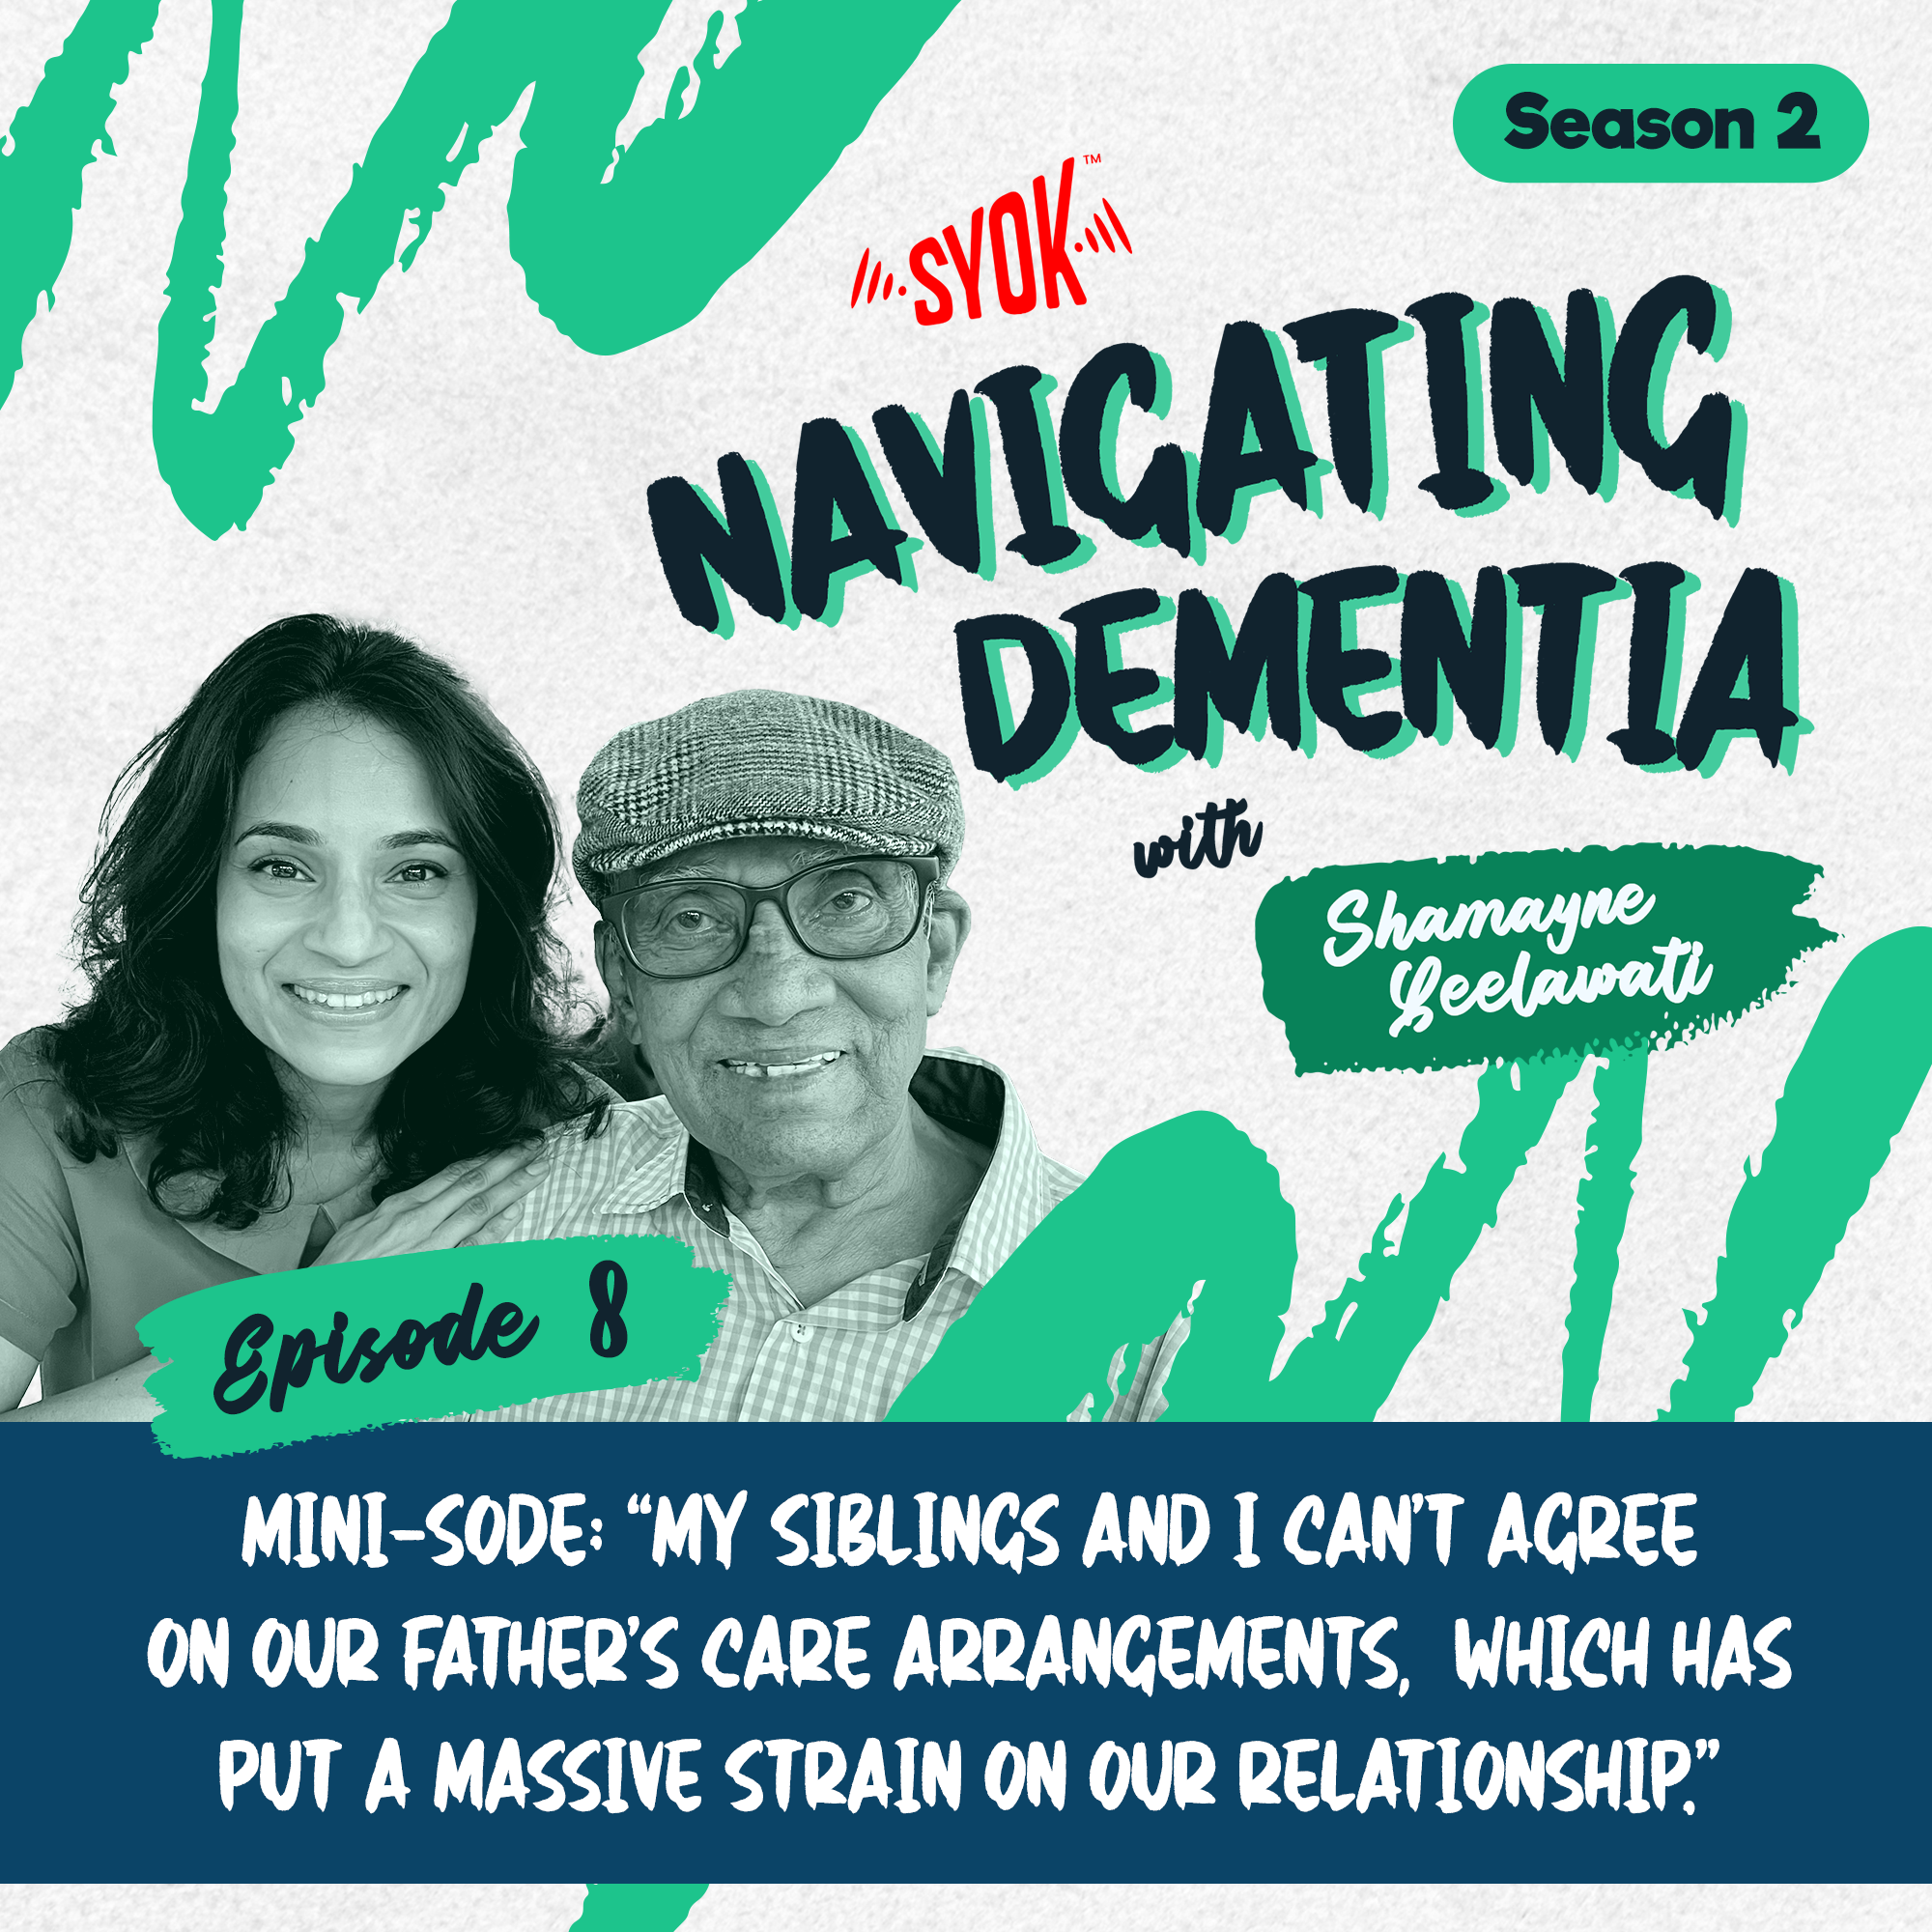 Mini-sode: “My siblings and I can’t agree on our father’s care arrangements, which has put a massive strain on our relationship.” | Navigating Dementia S2E8